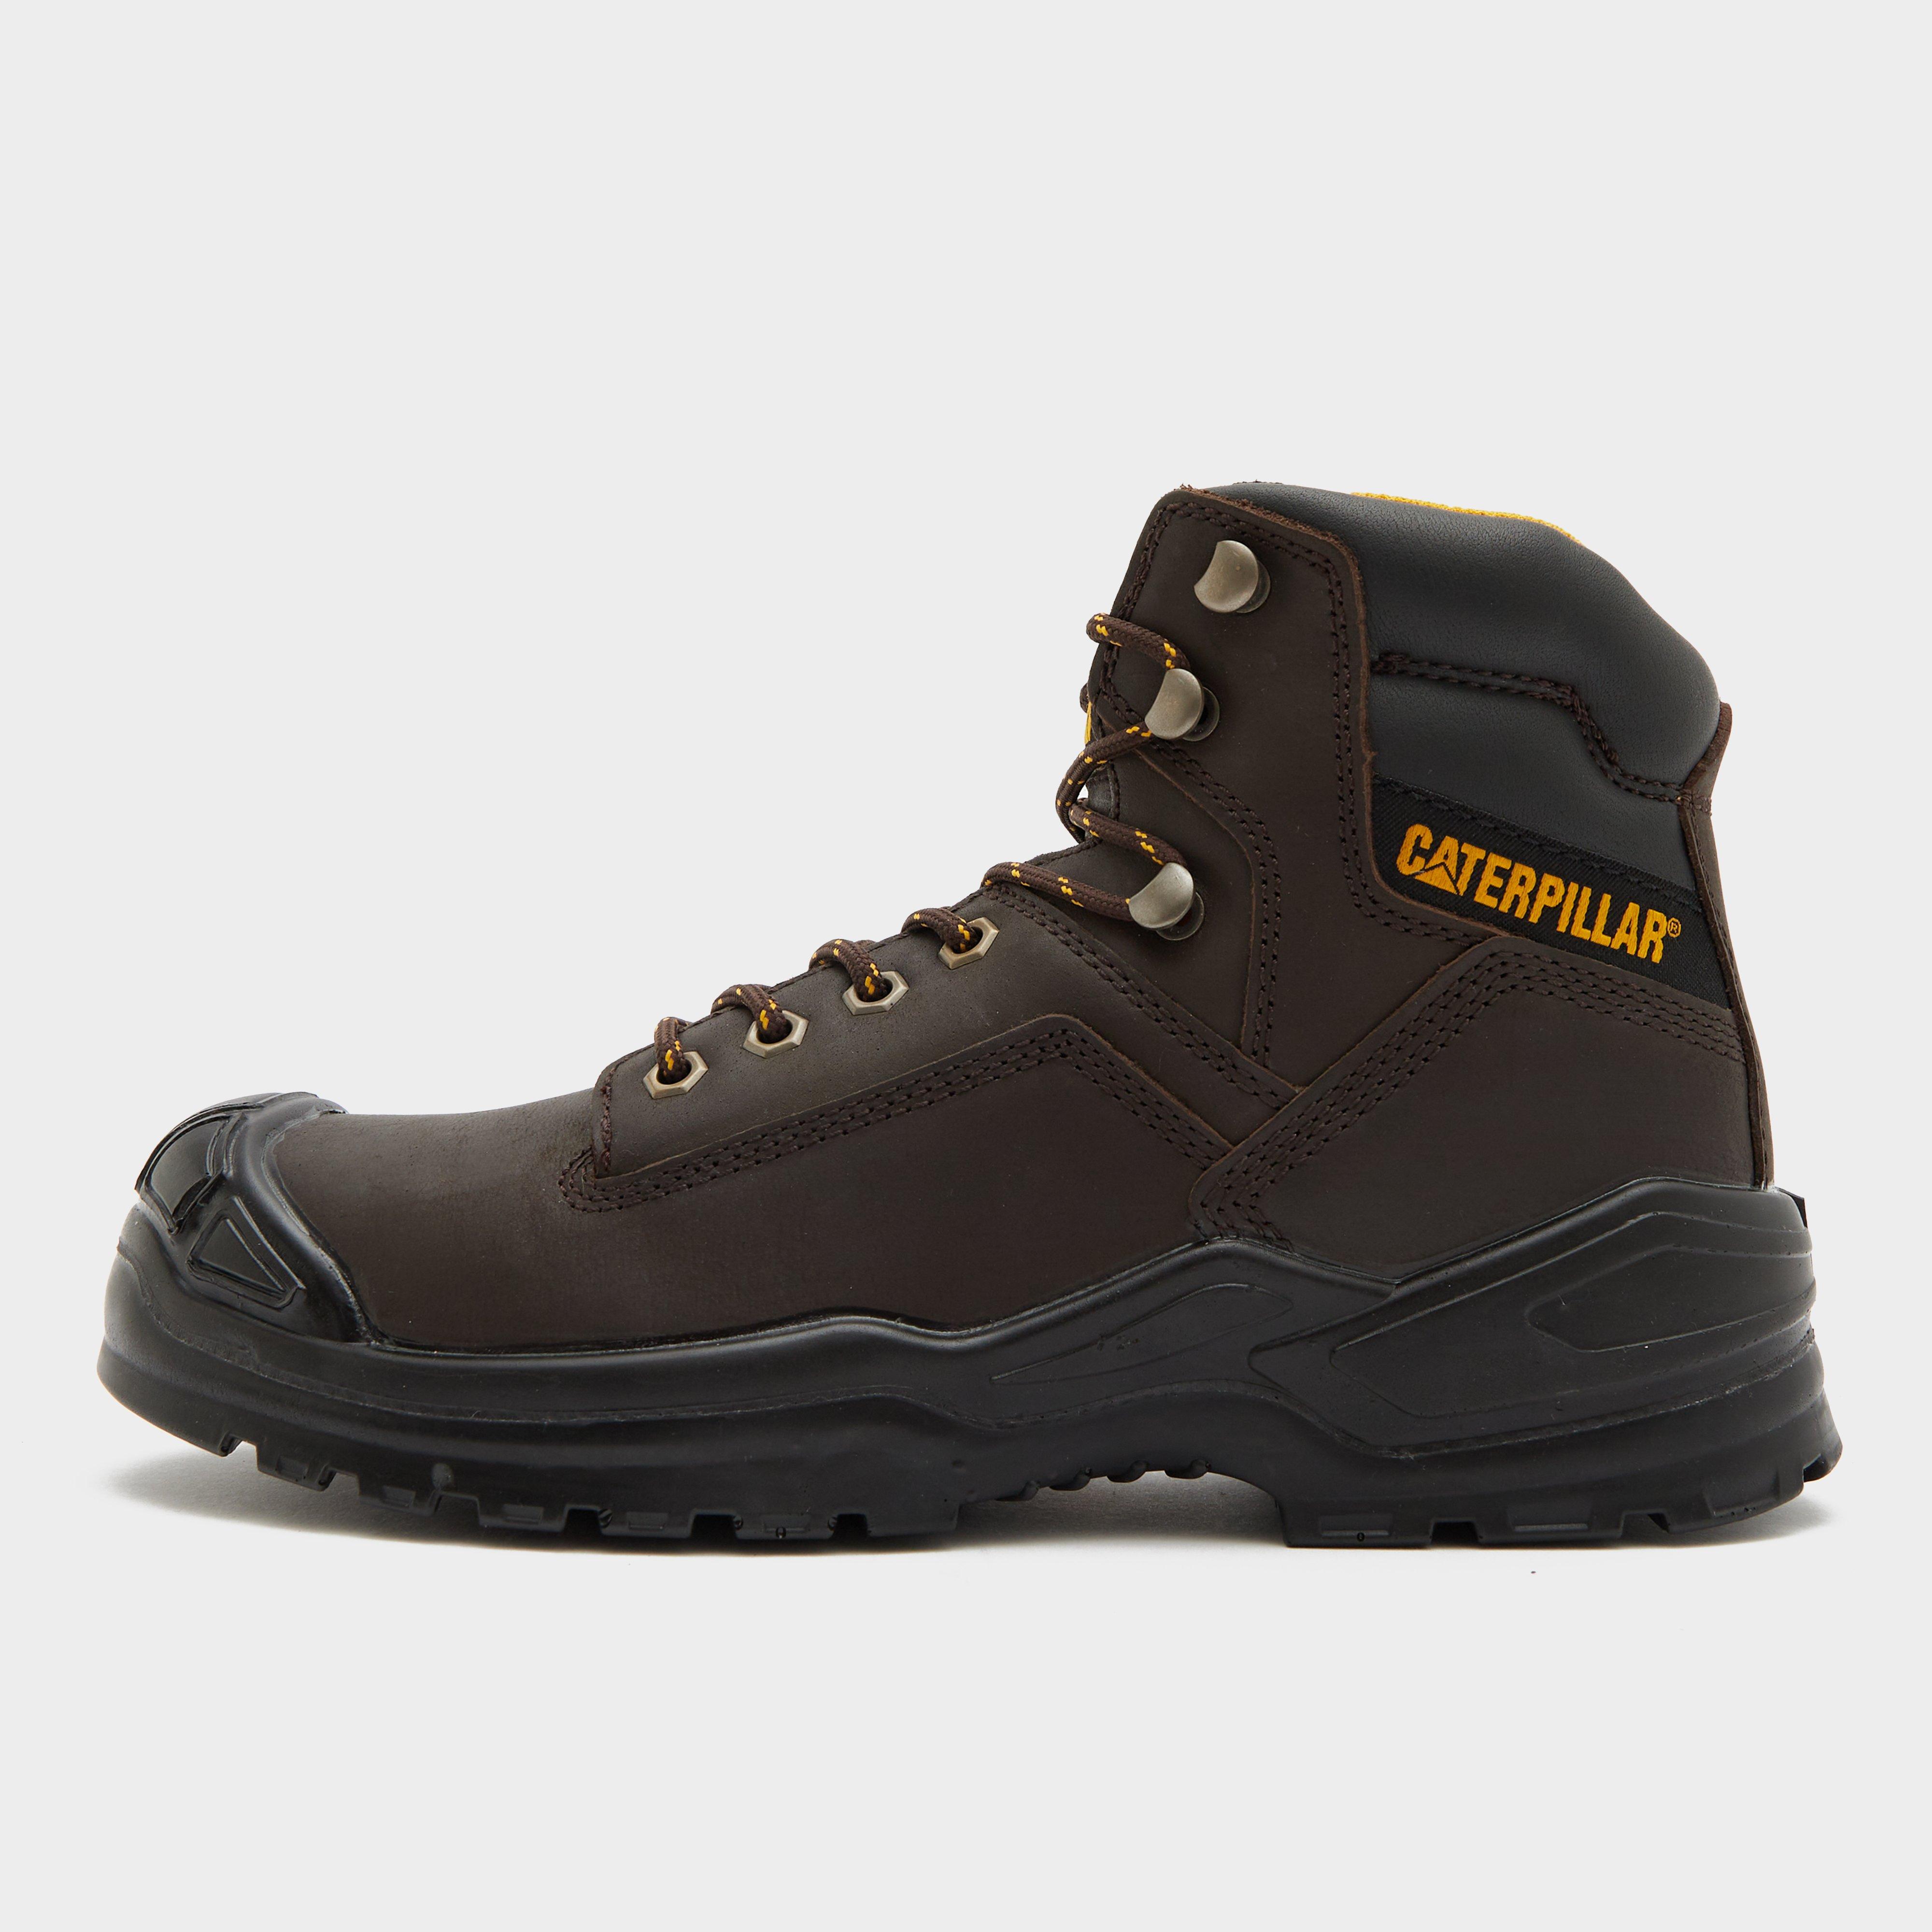  CAT Striver Mid S3 Safety Boot S3